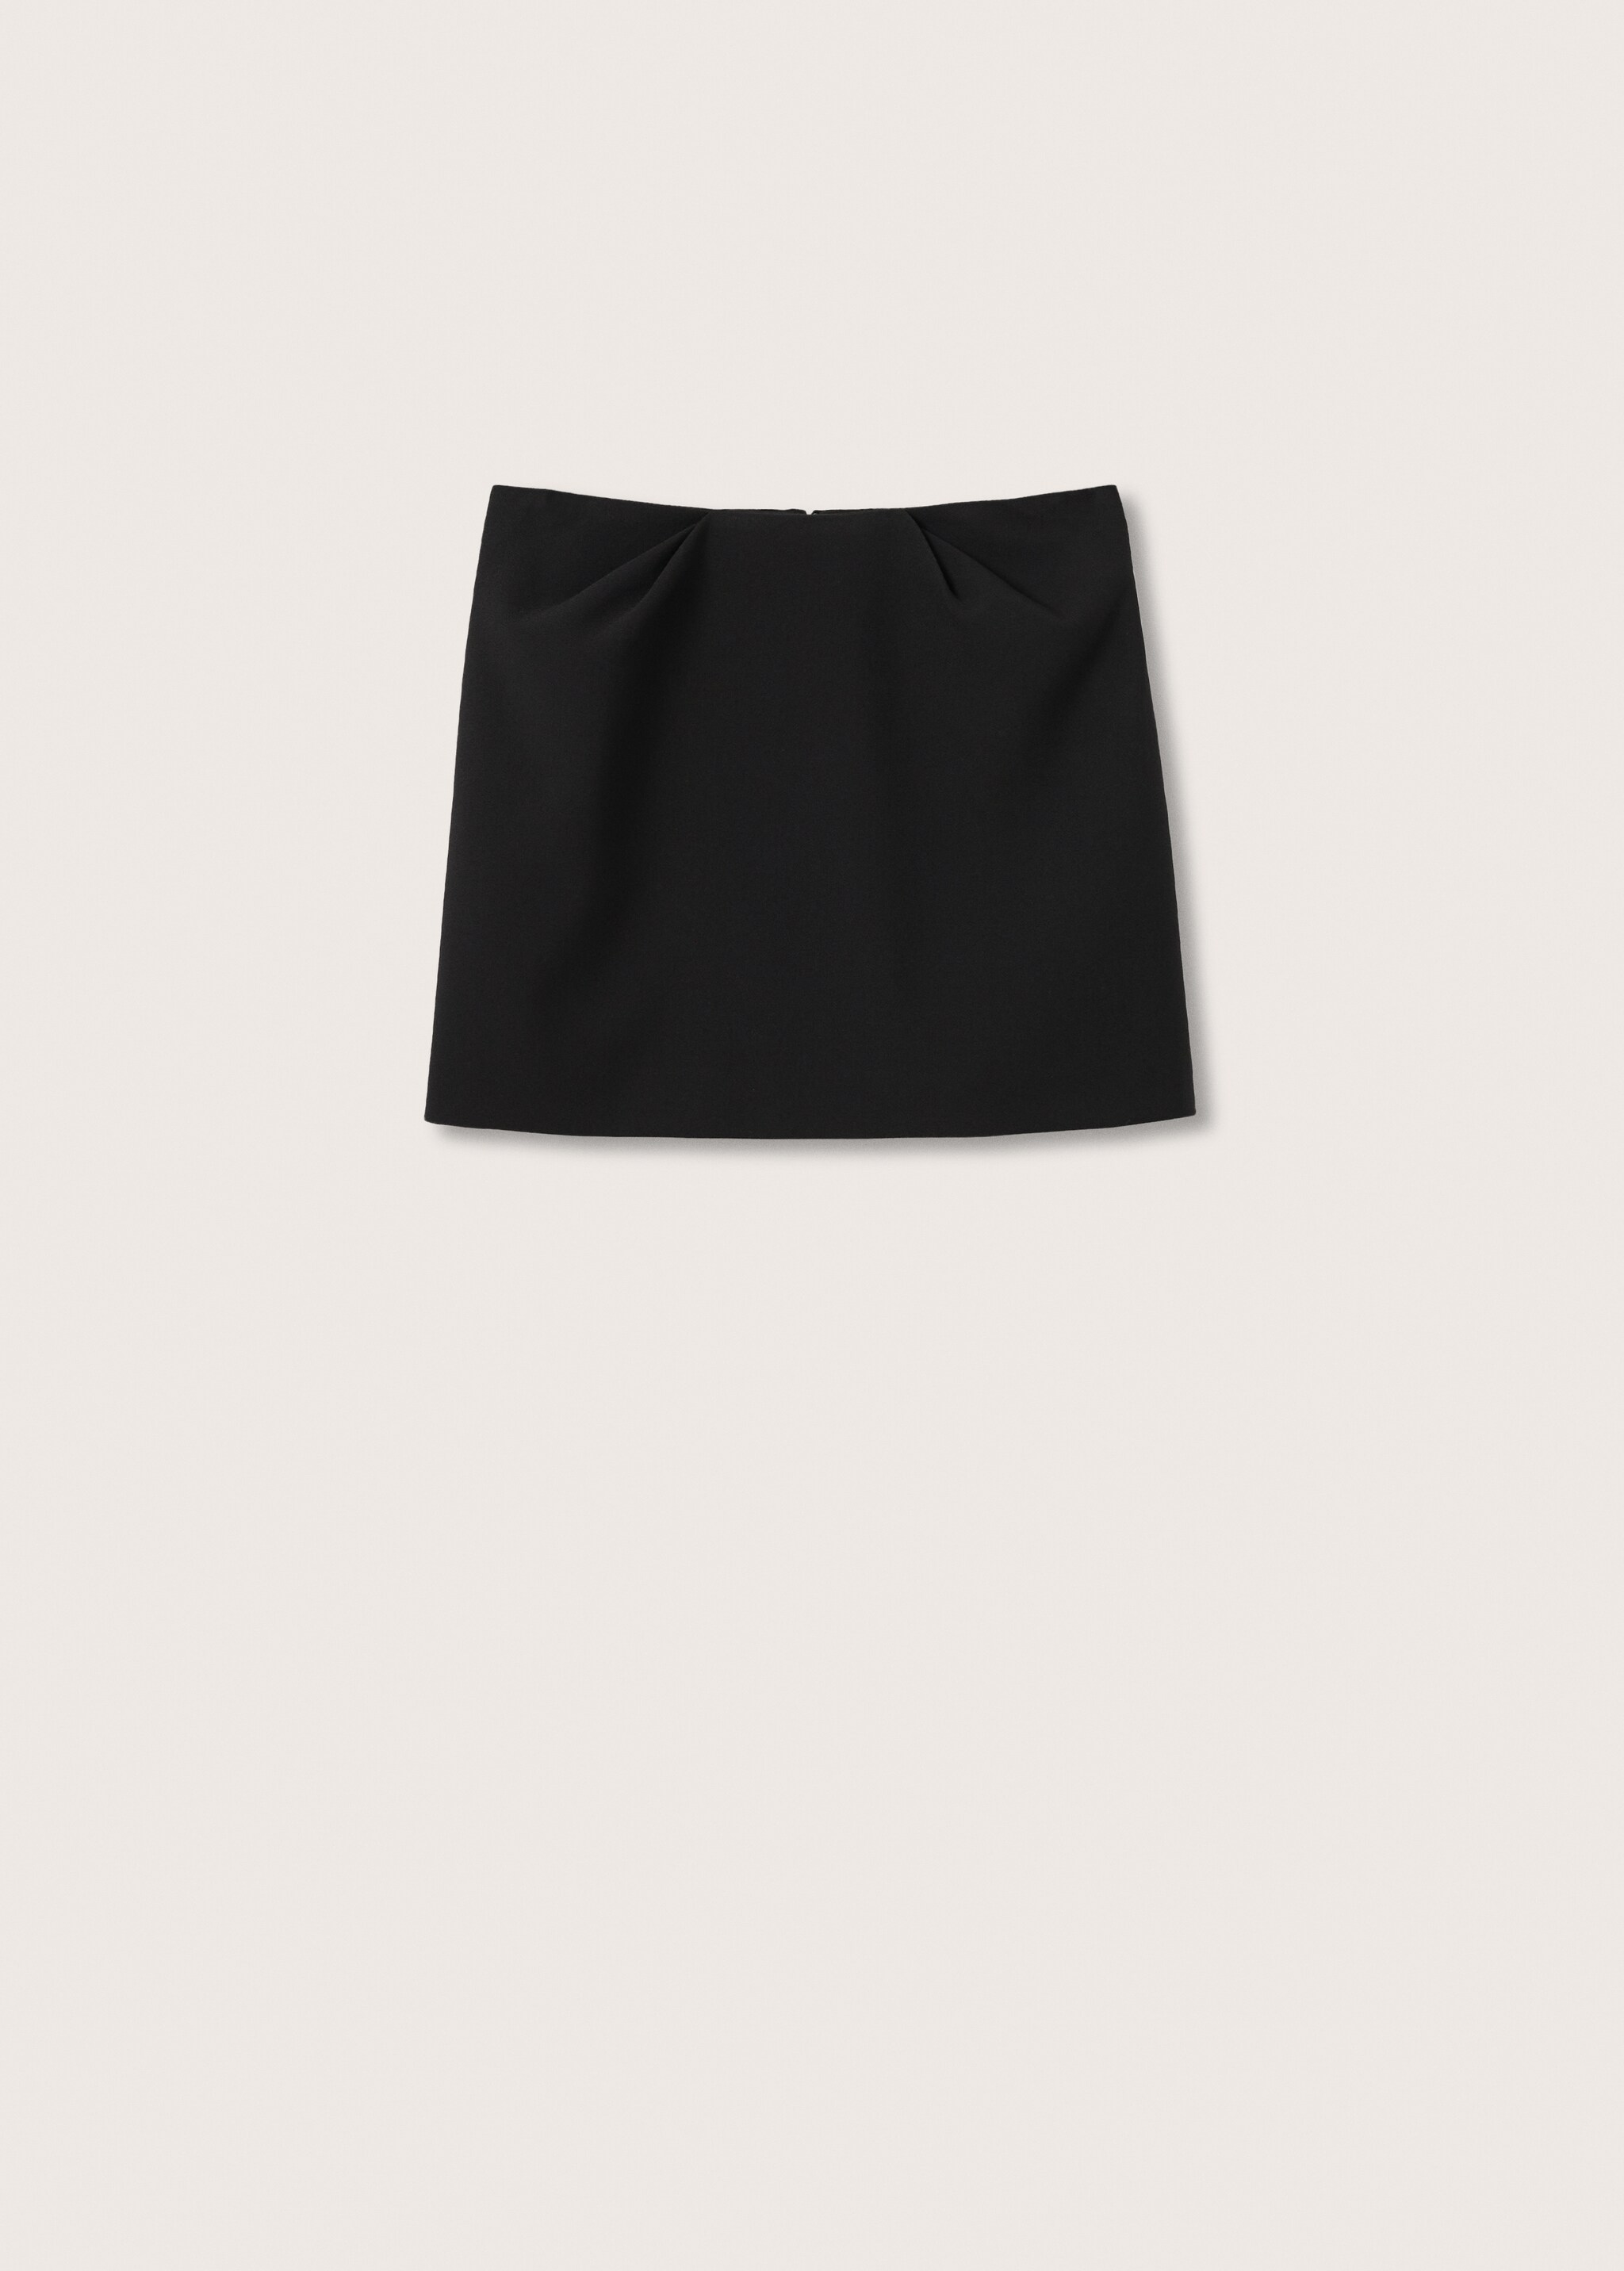 Pleat miniskirt - Article without model